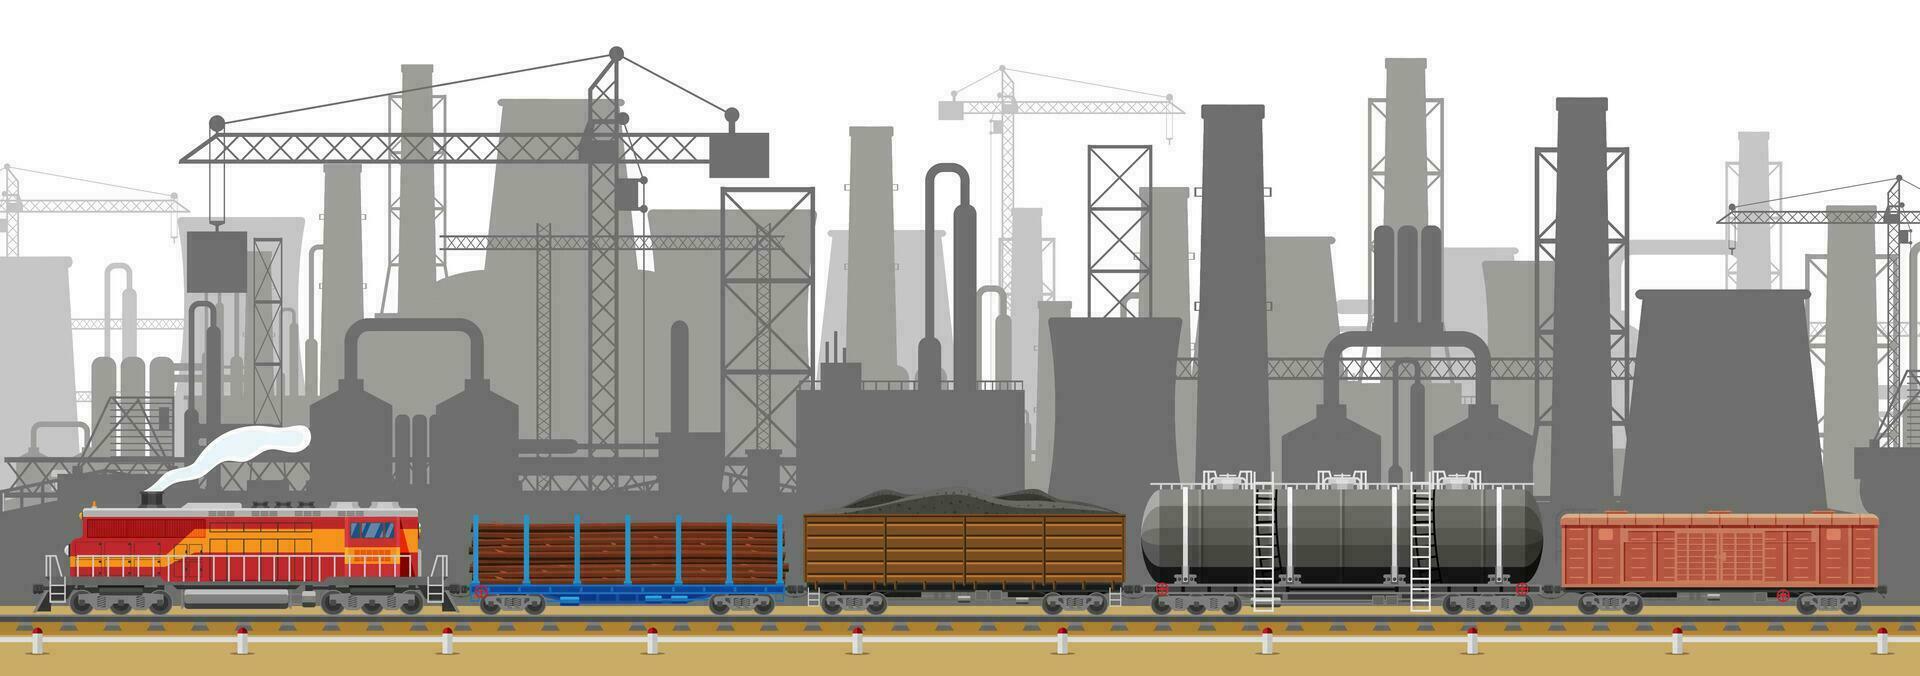 Industrial Landscape of Cargo Rail Transportation with Plant and Fuming Pipes. Factory Building. Pipes, Buildings, Warehouse, Freight Railway Station. Cityscape Urban Skyline. Flat Vector Illustration